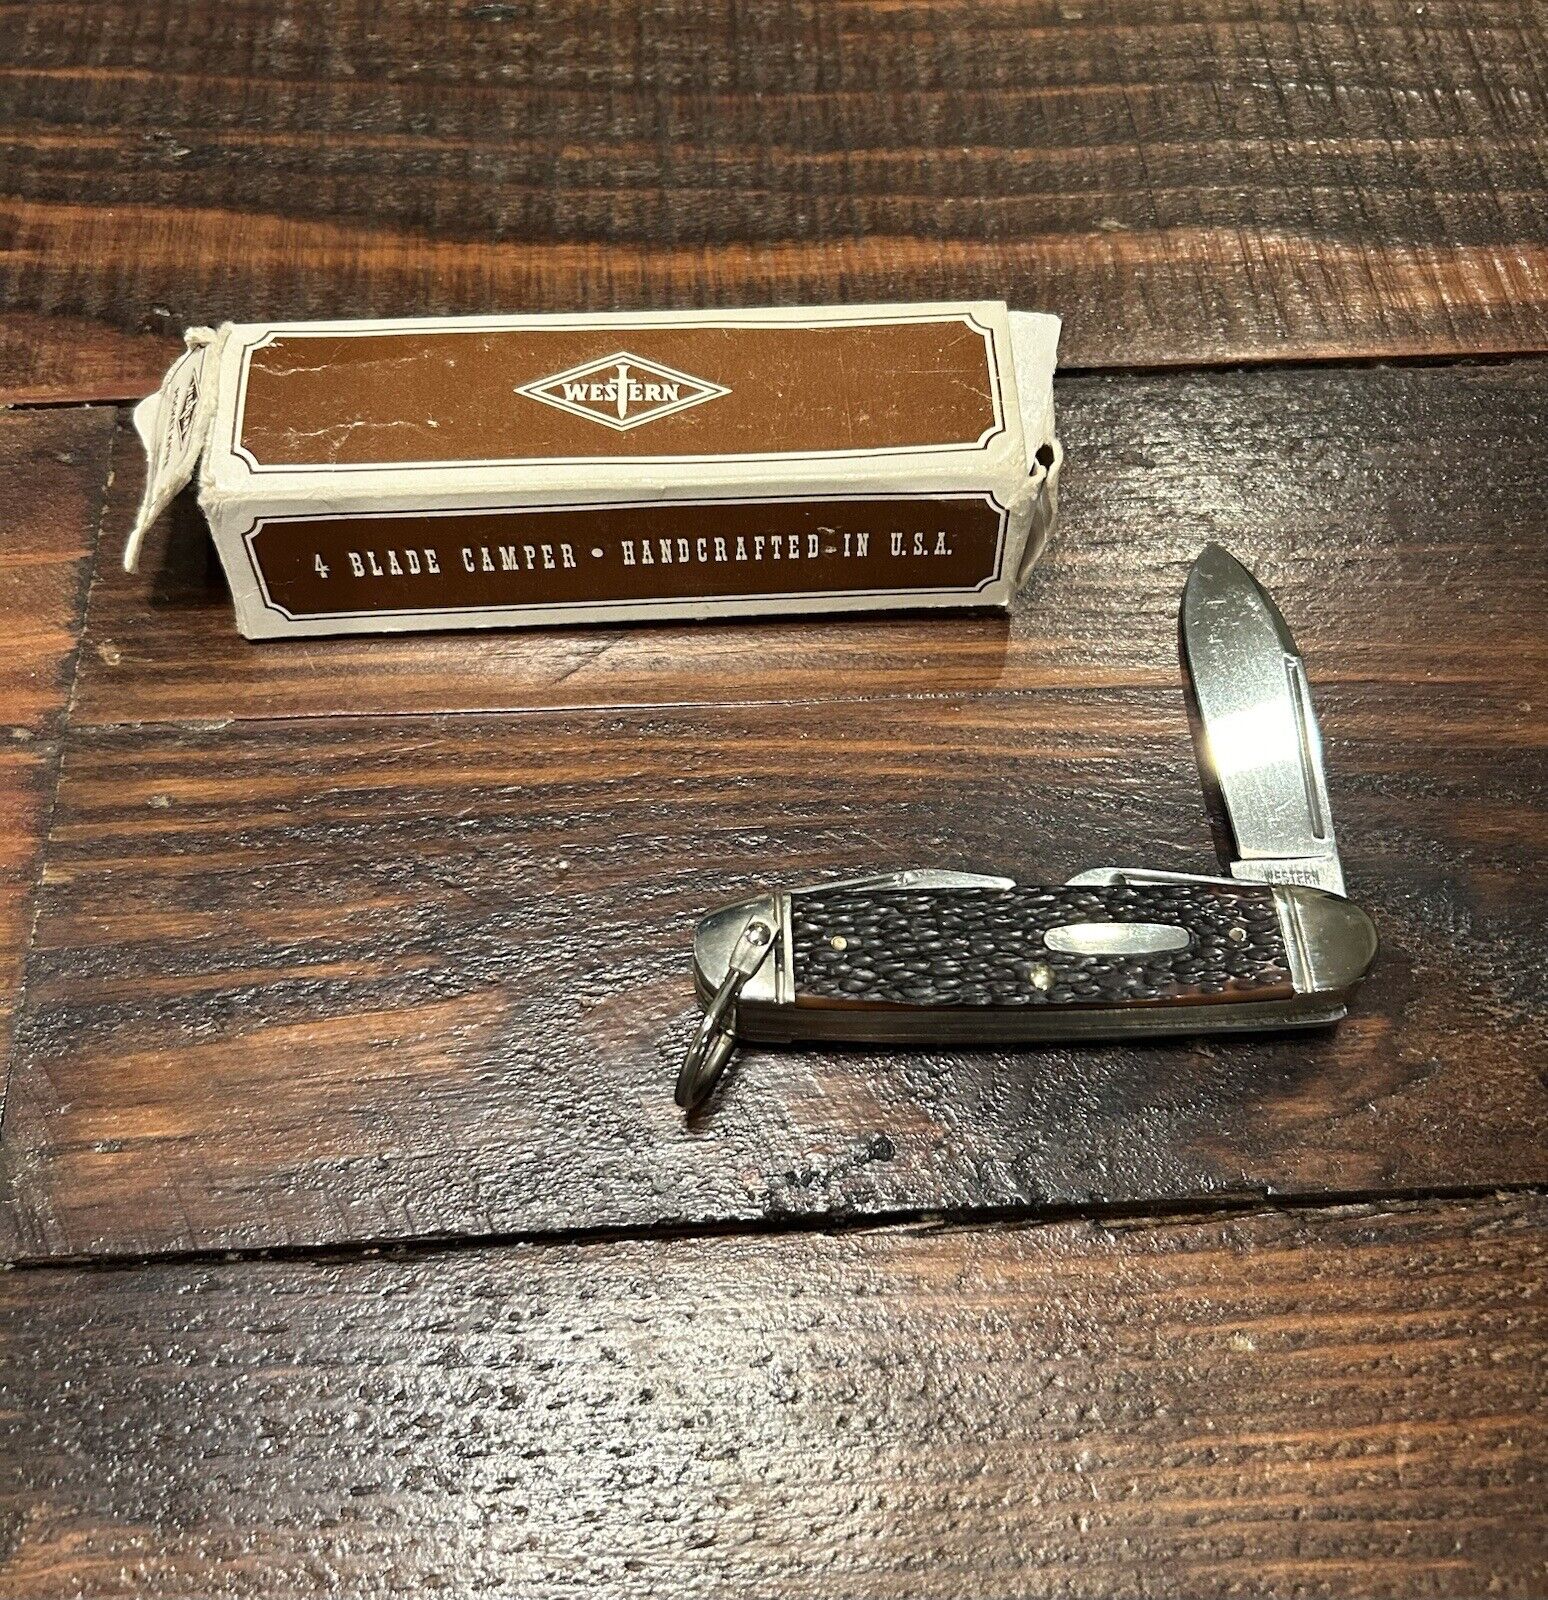 Vintage WESTERN S-901 E Scout Utility Knife Never Used: Box Included